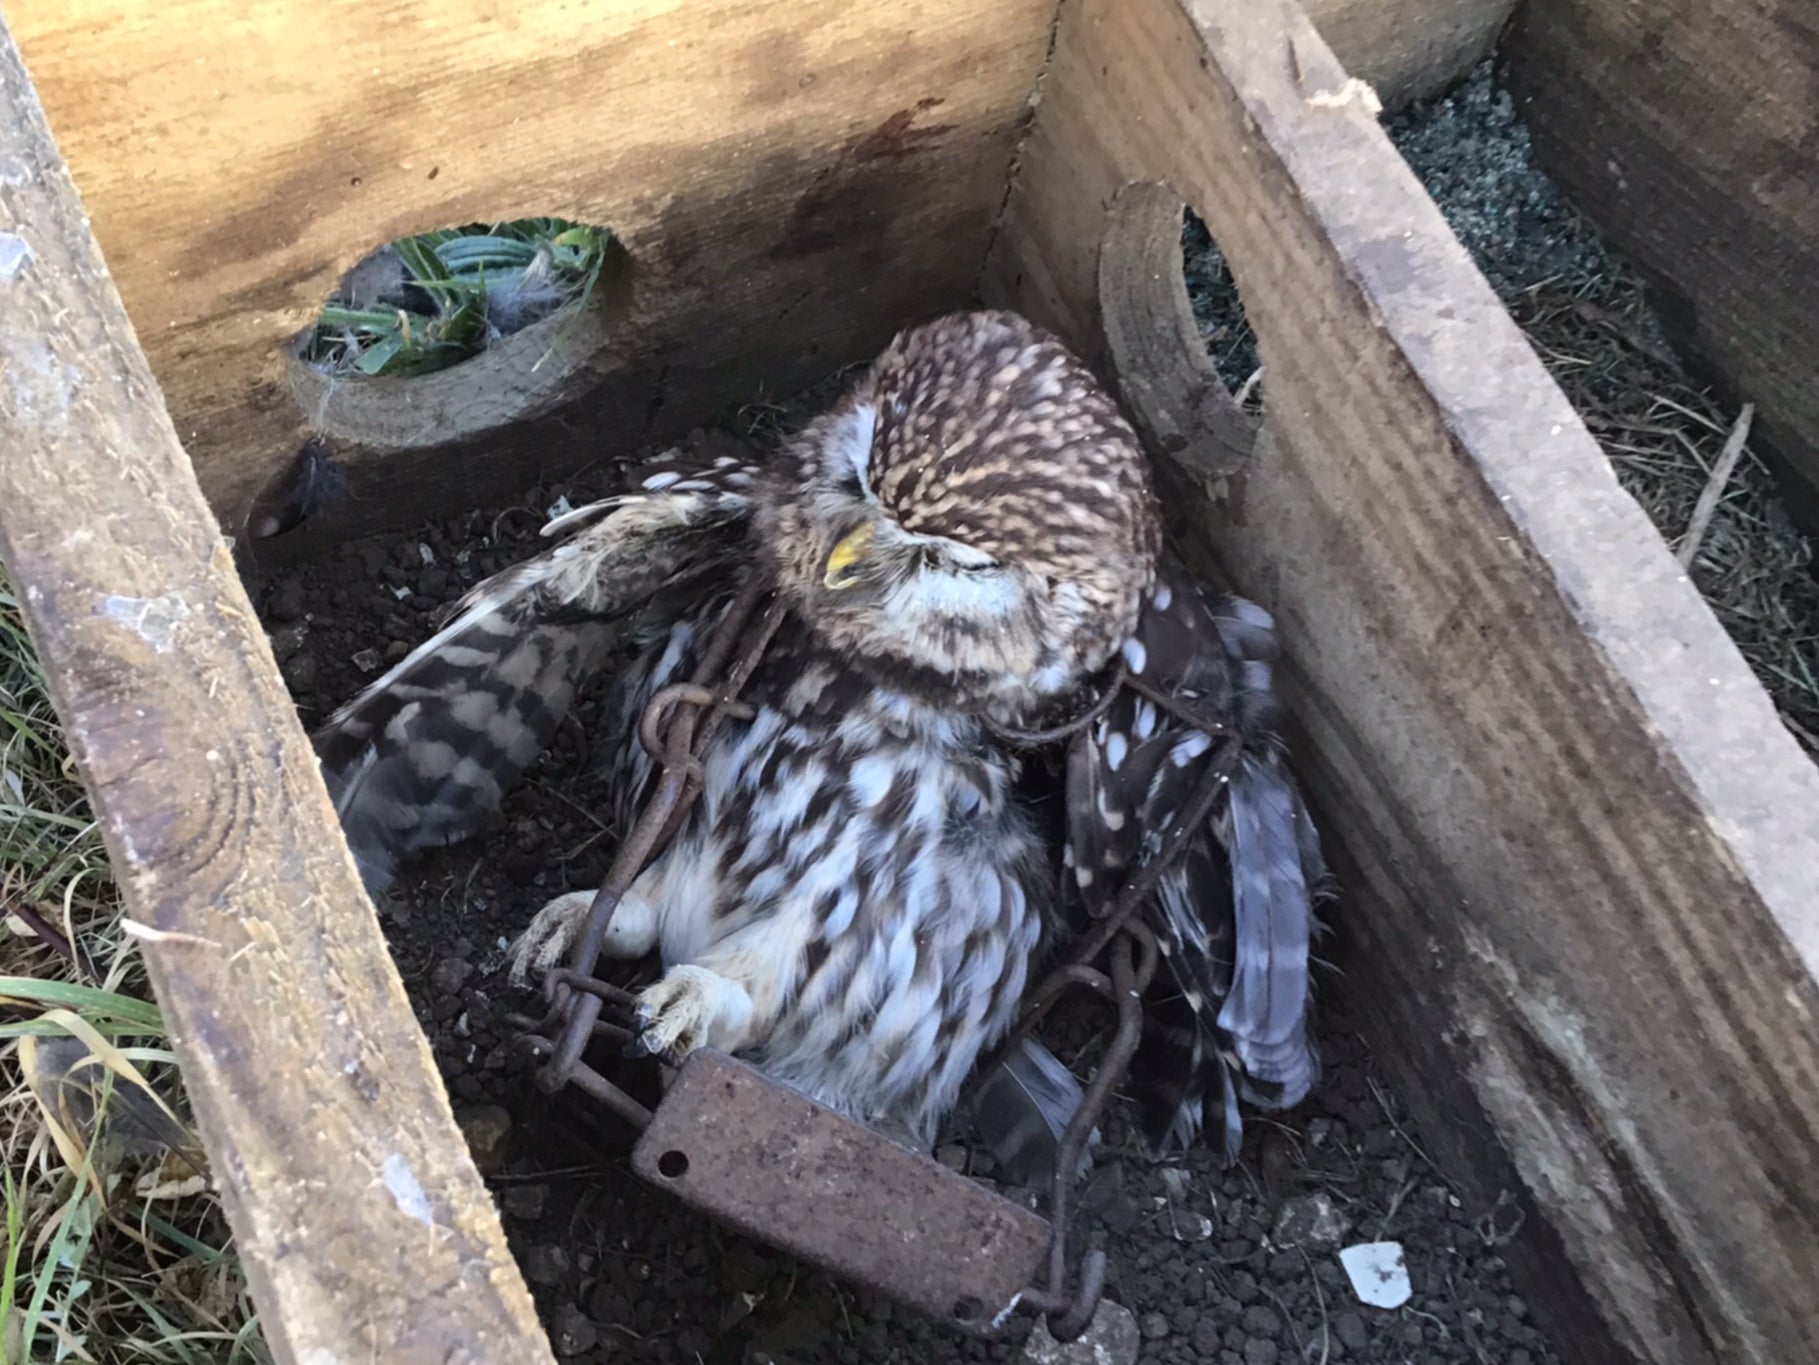 The little owl was caught in a legal trap which is thought to have been improperly set